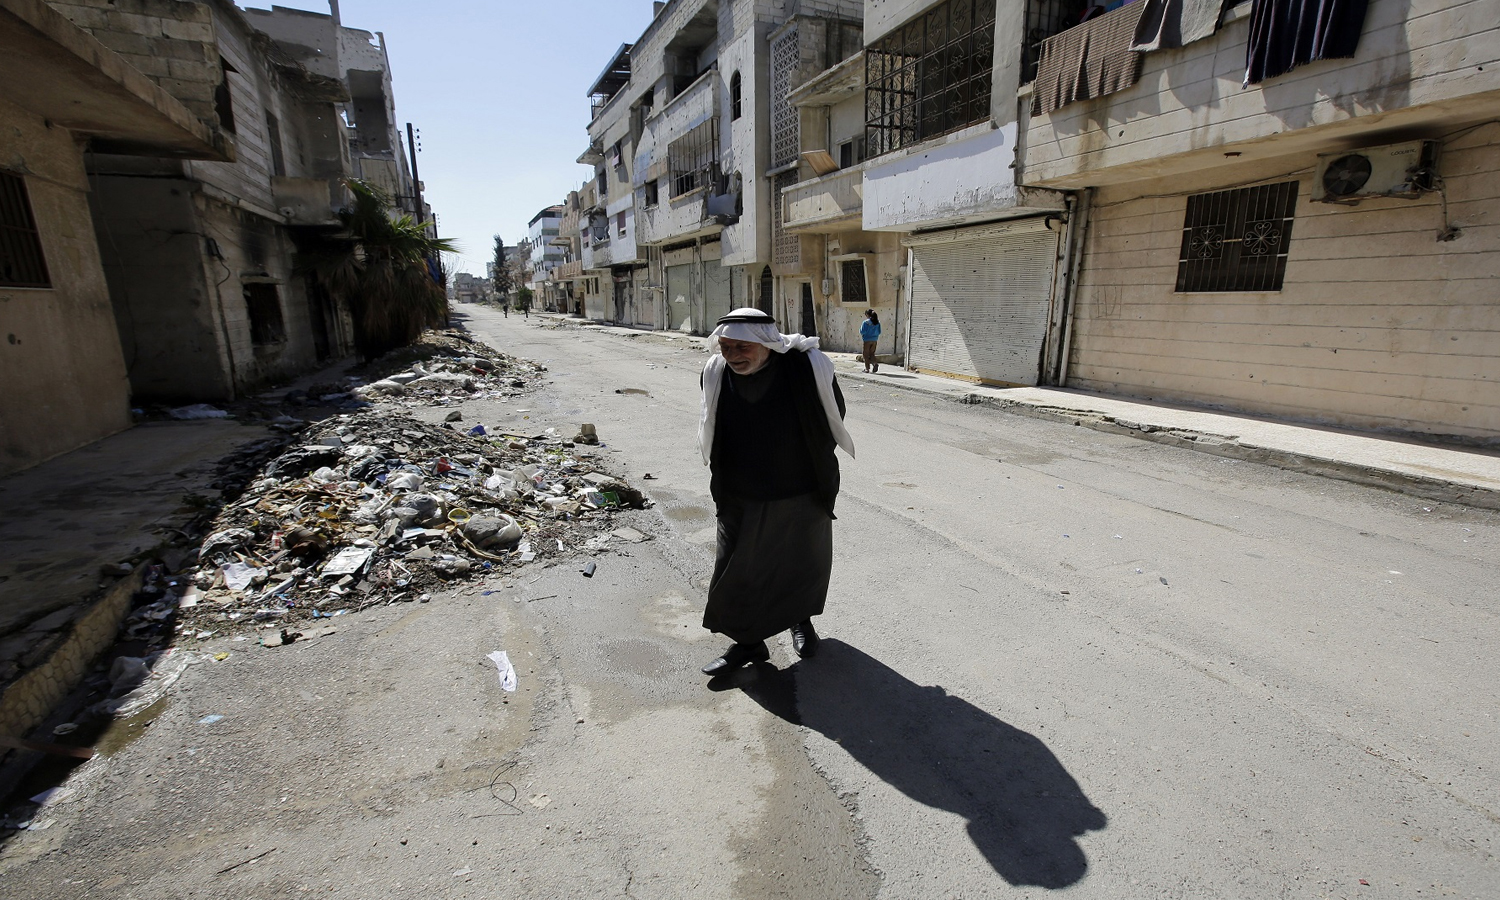 An elderly Syrian man walking in one of the residential neighborhoods of Homs city after the displacement of over 2000 civilians from the city following the siege lifting - 12 February 2015 (AFP)